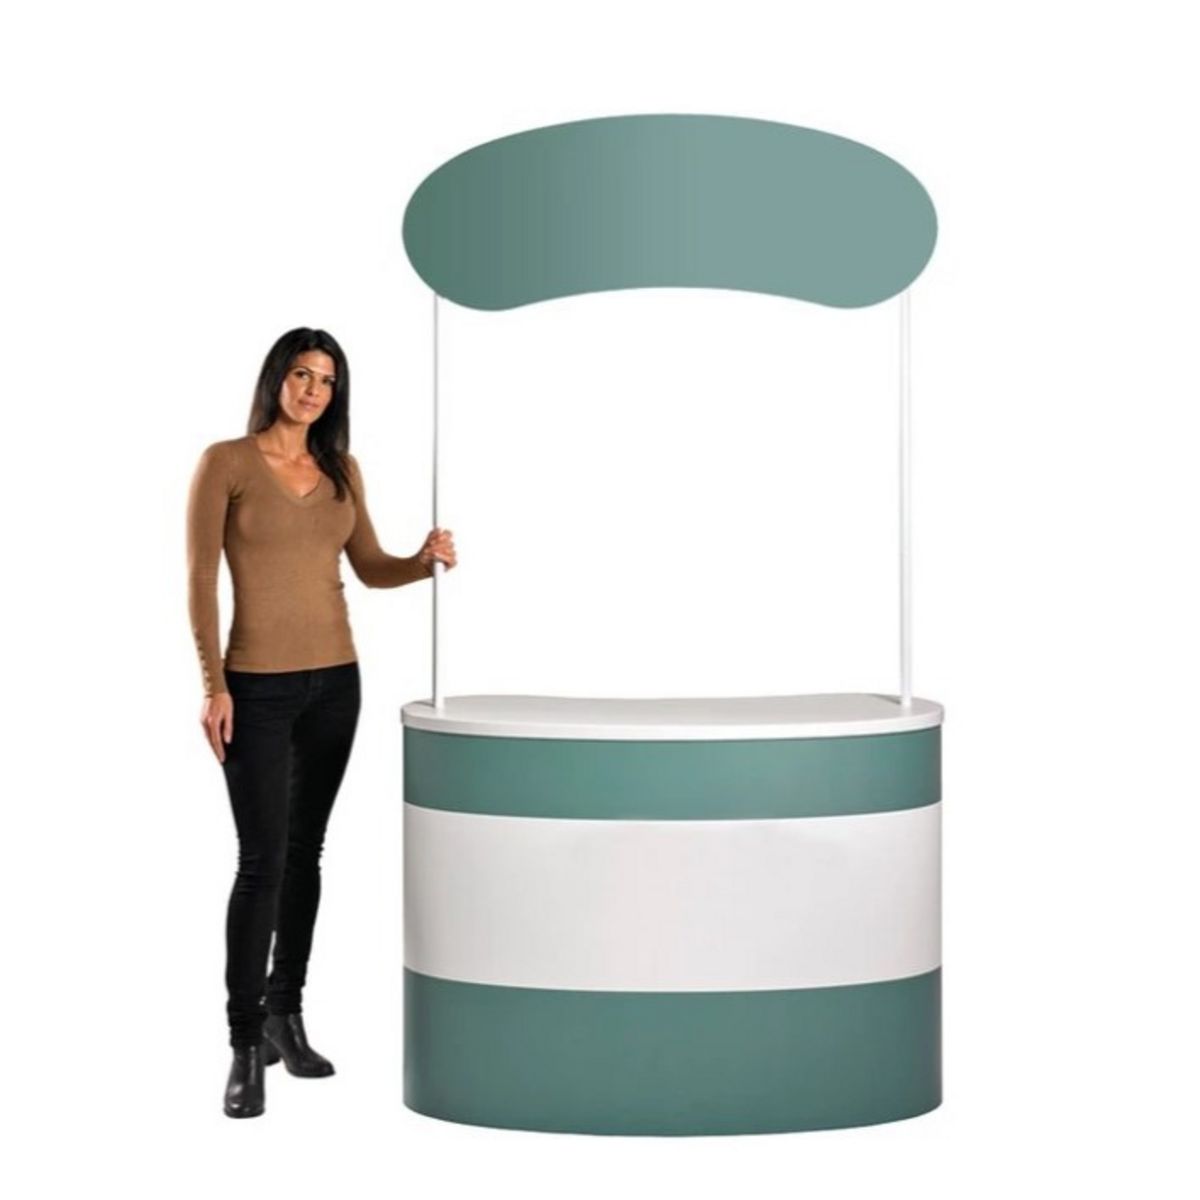 Lady showing the Finesse promotional display counter with the optional poles and header..jpg